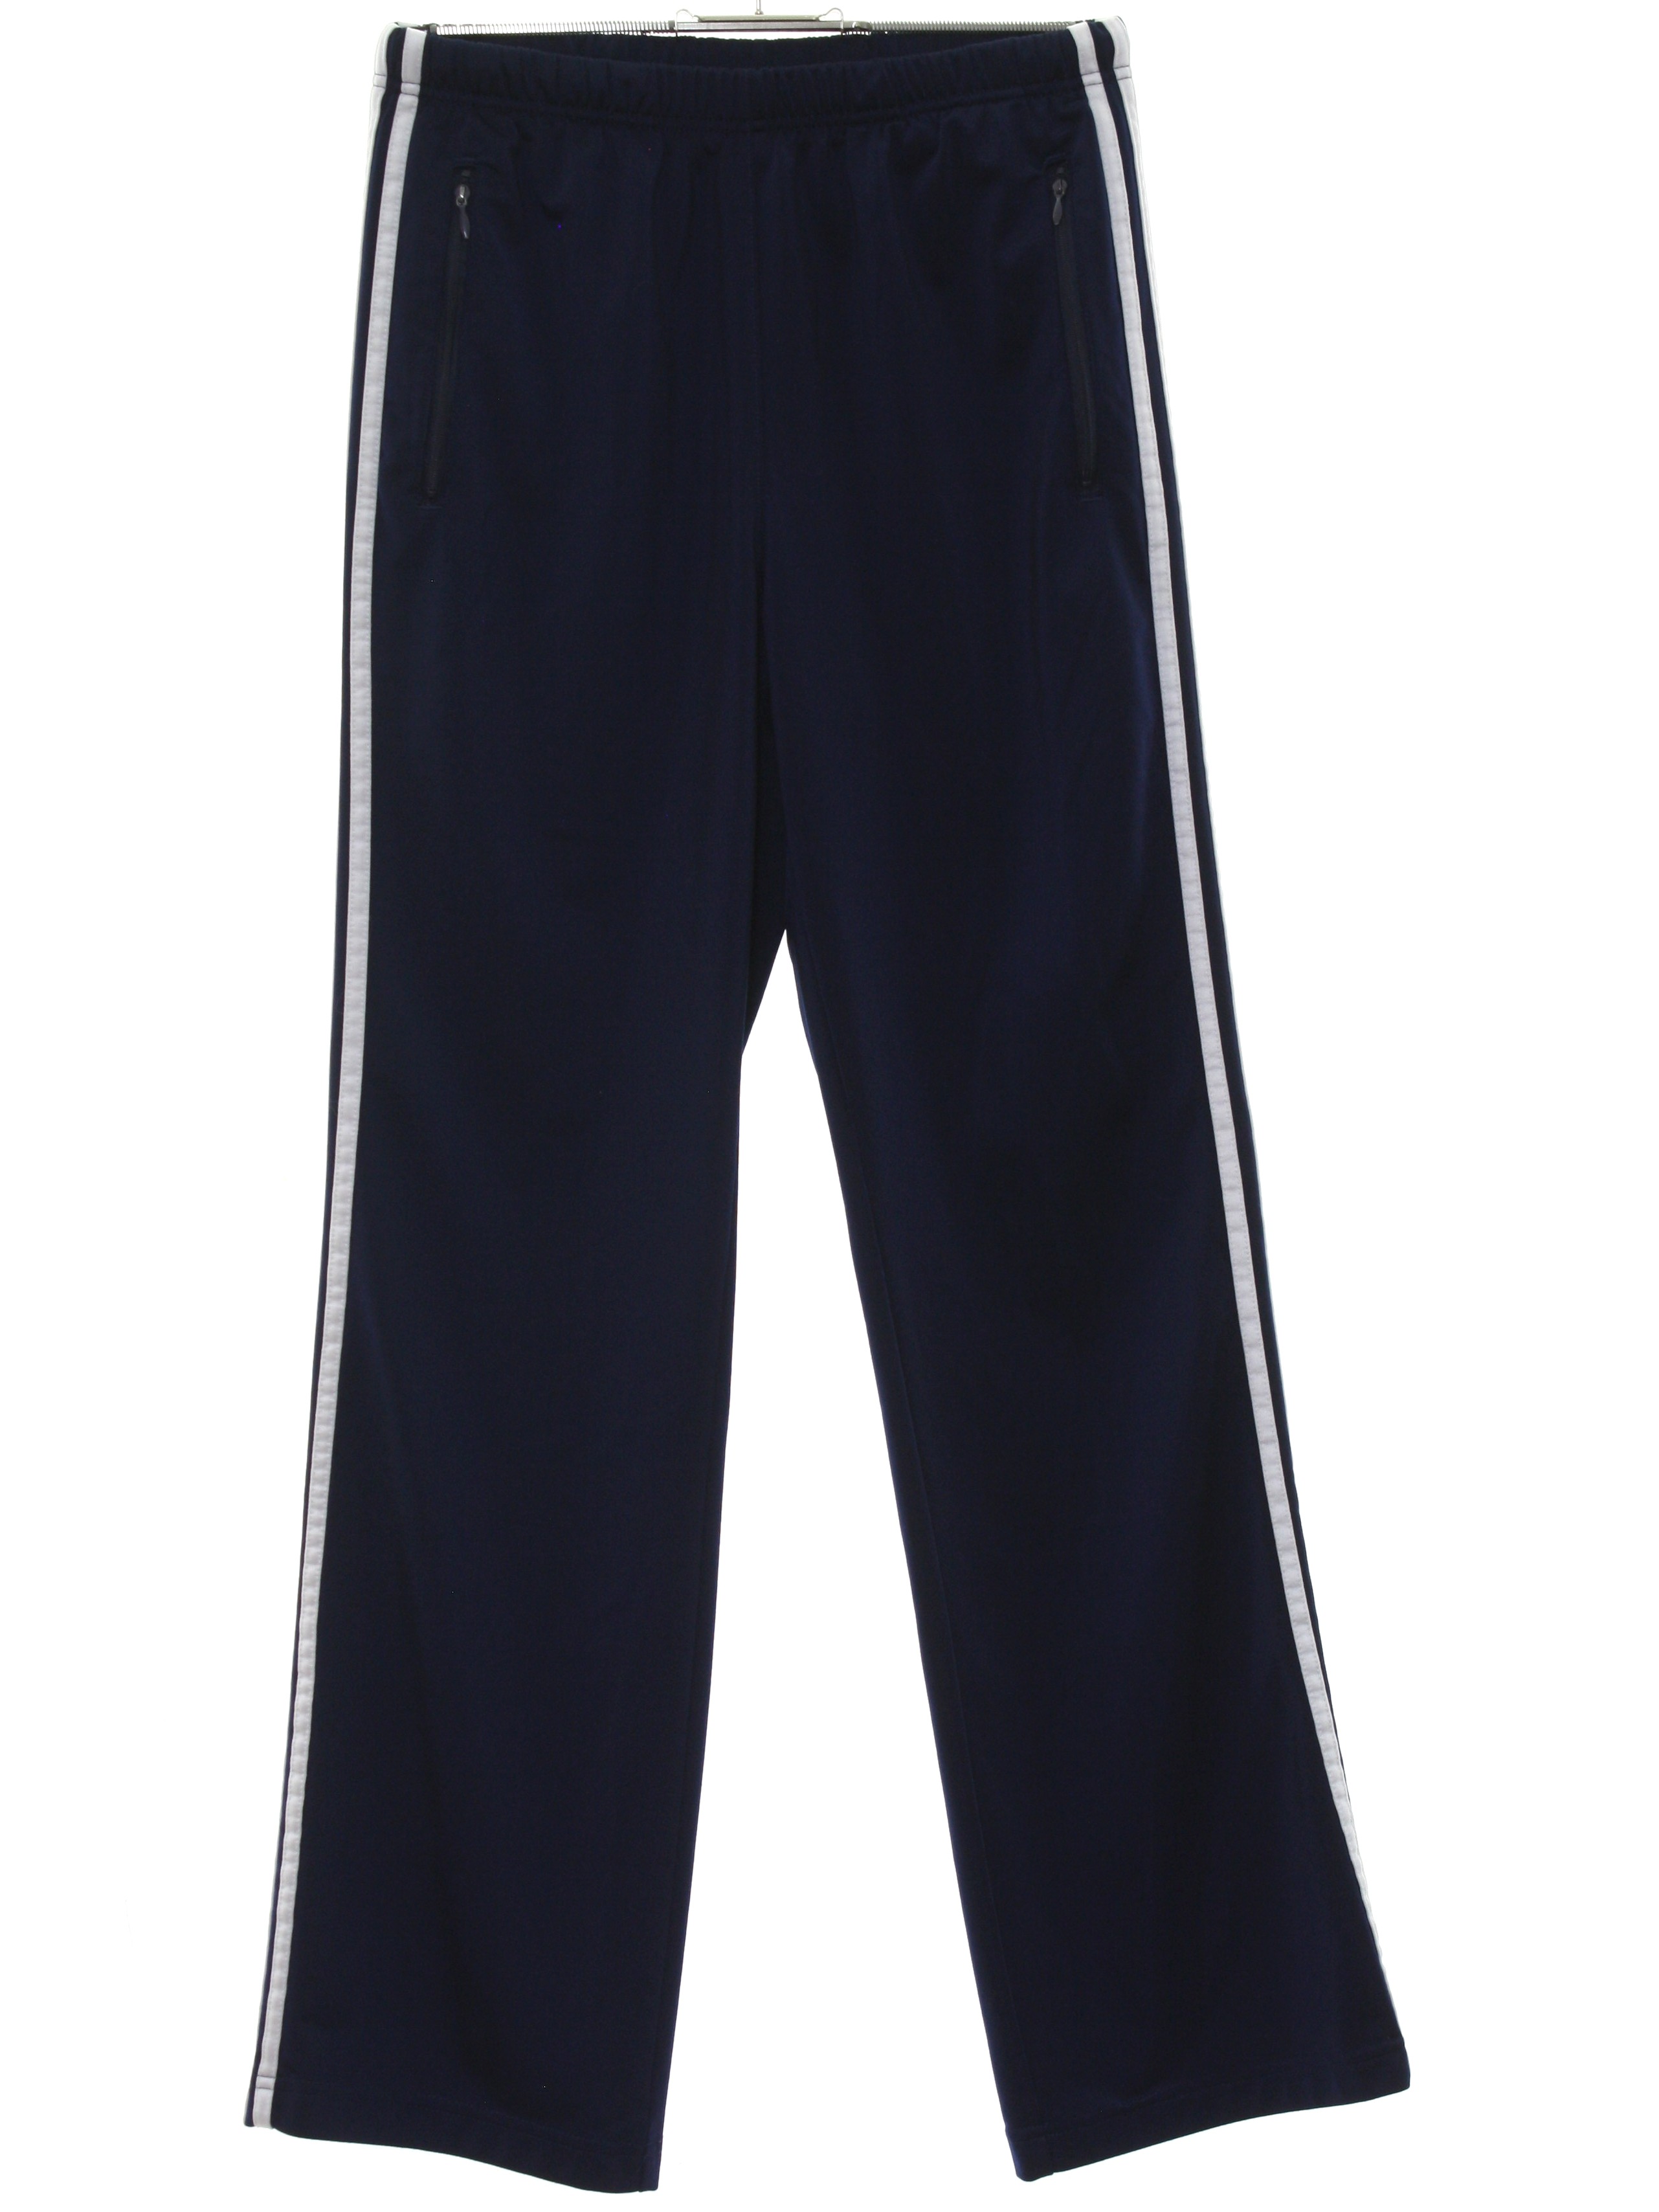 Pants: 90s -Adidas- Mens midnight blue solid colored polyester flat ...